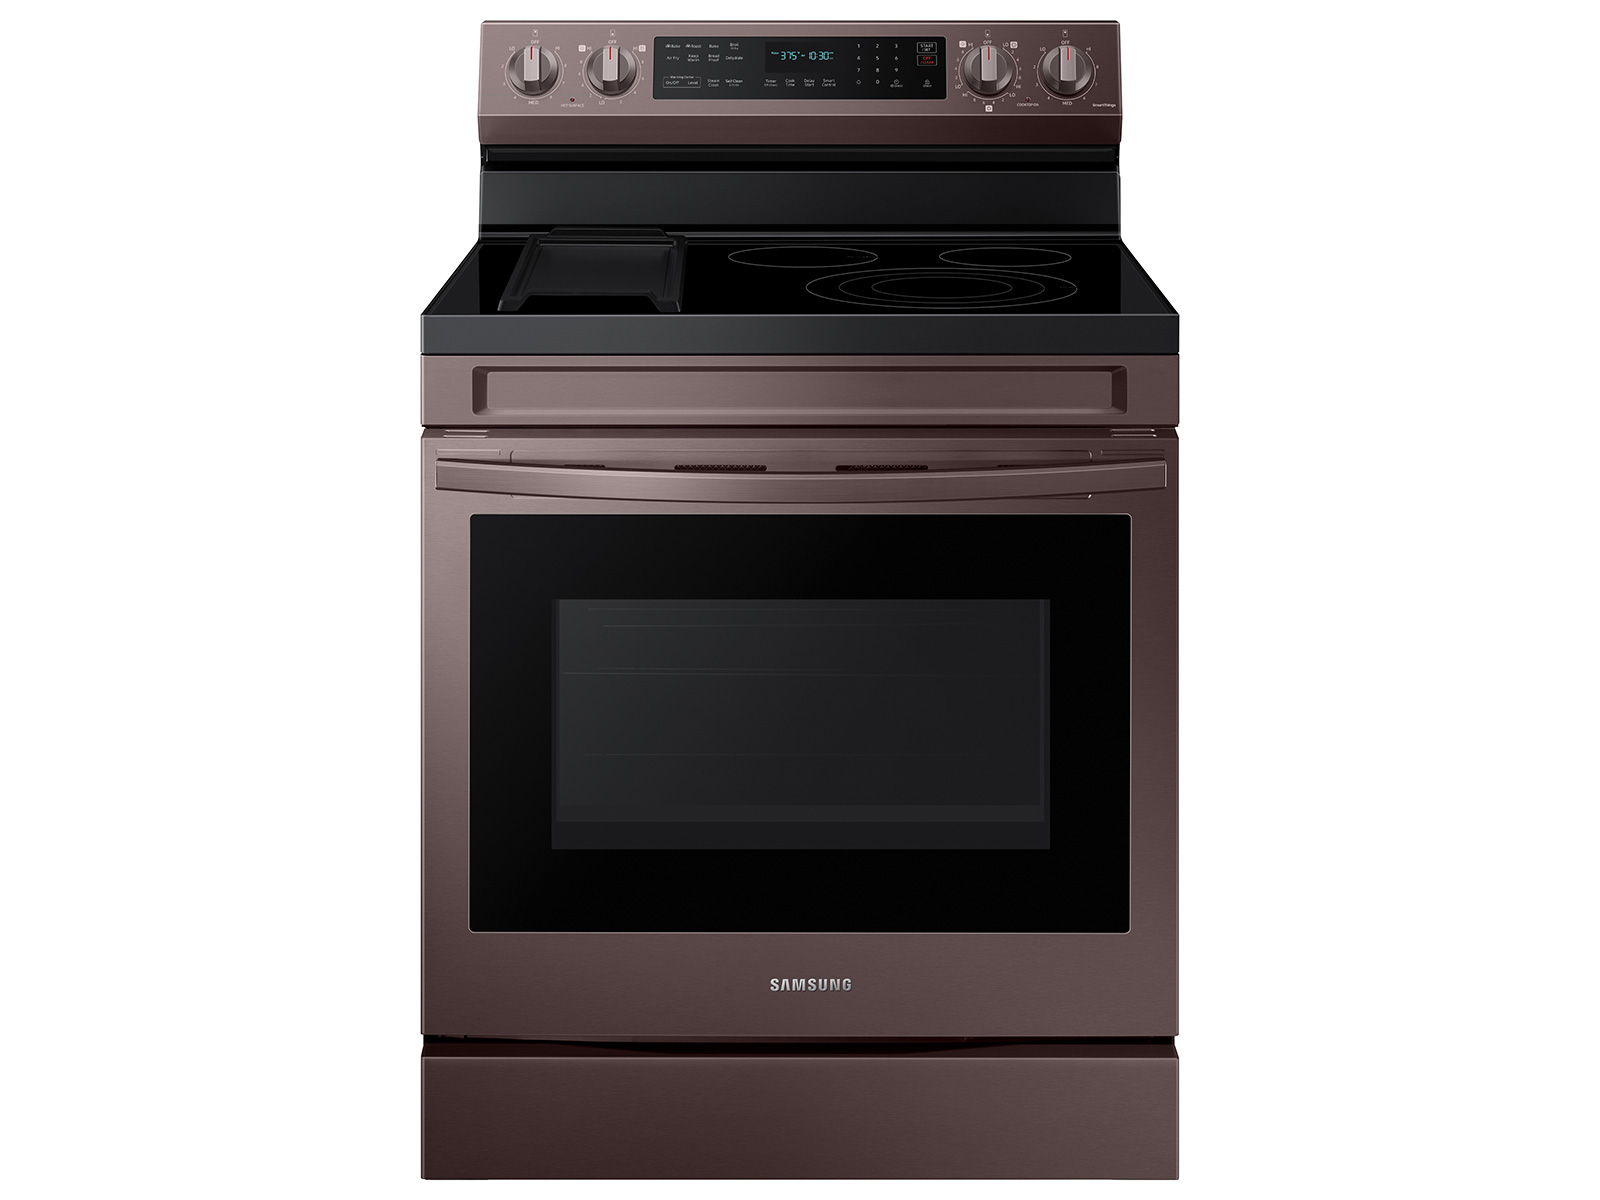 Samsung 6.3 cu. ft. Smart Freestanding Electric Range with No-Preheat Air Fry, Convection+ & Griddle in Tuscan Stainless Steel(NE63A6711ST/AA)